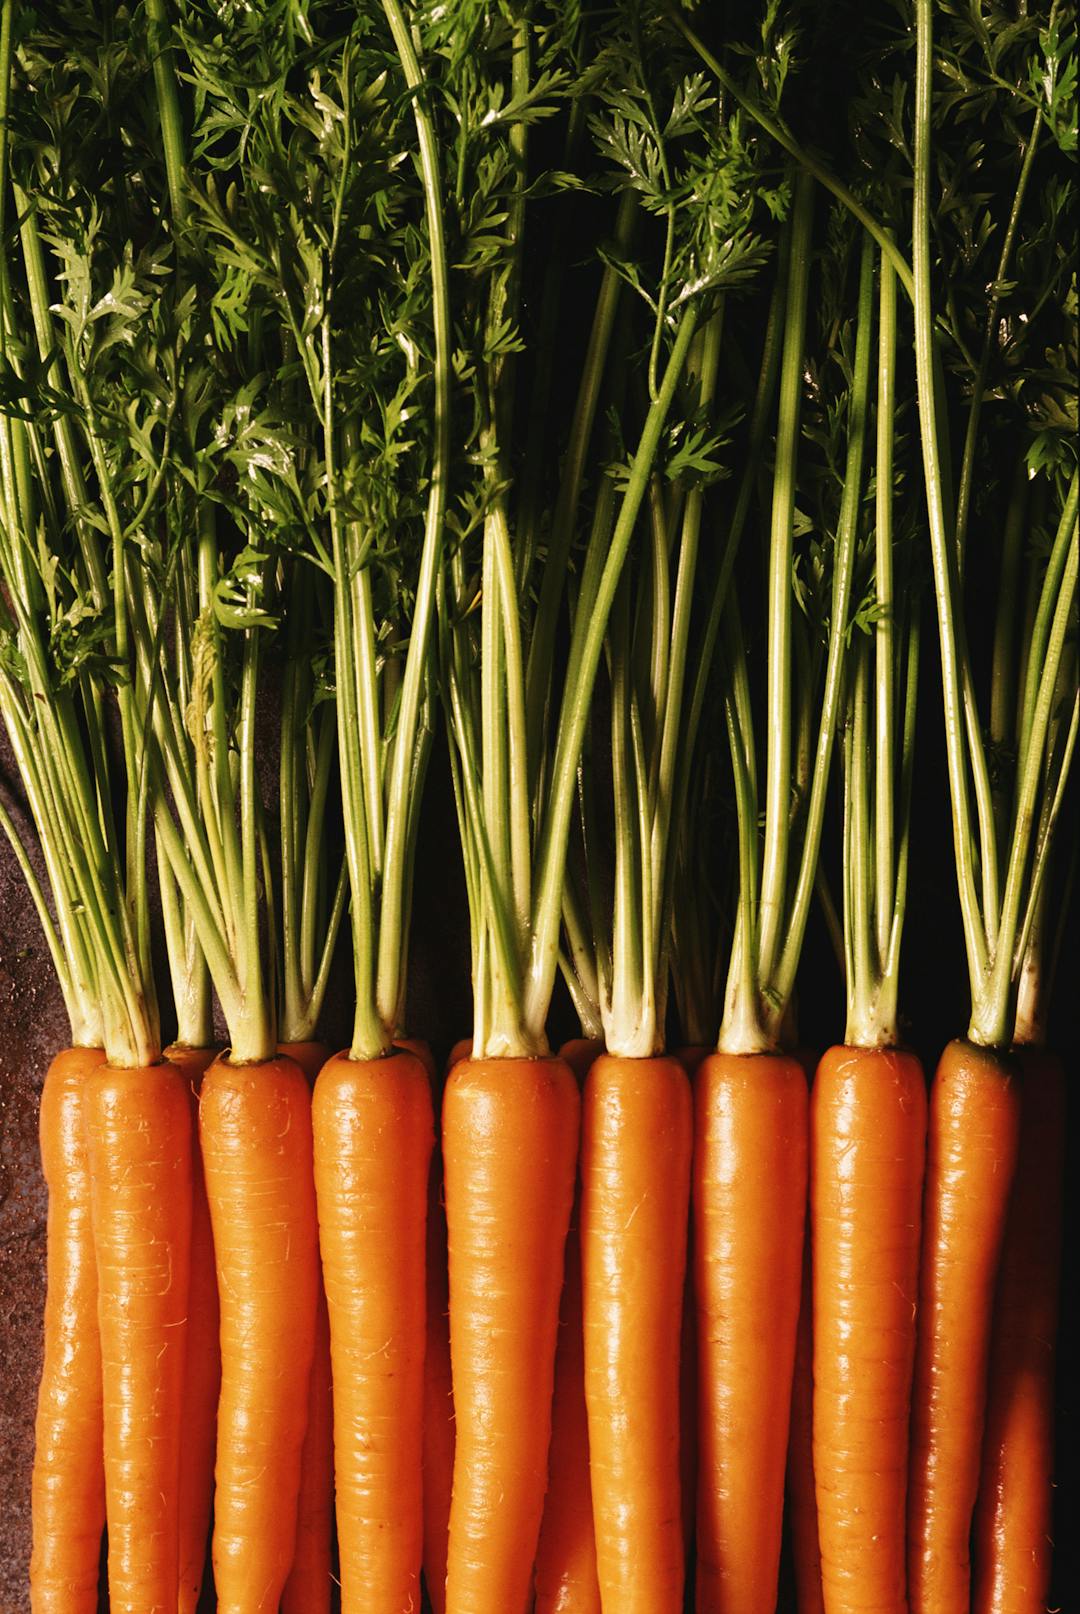 Image of a bunch of carrots